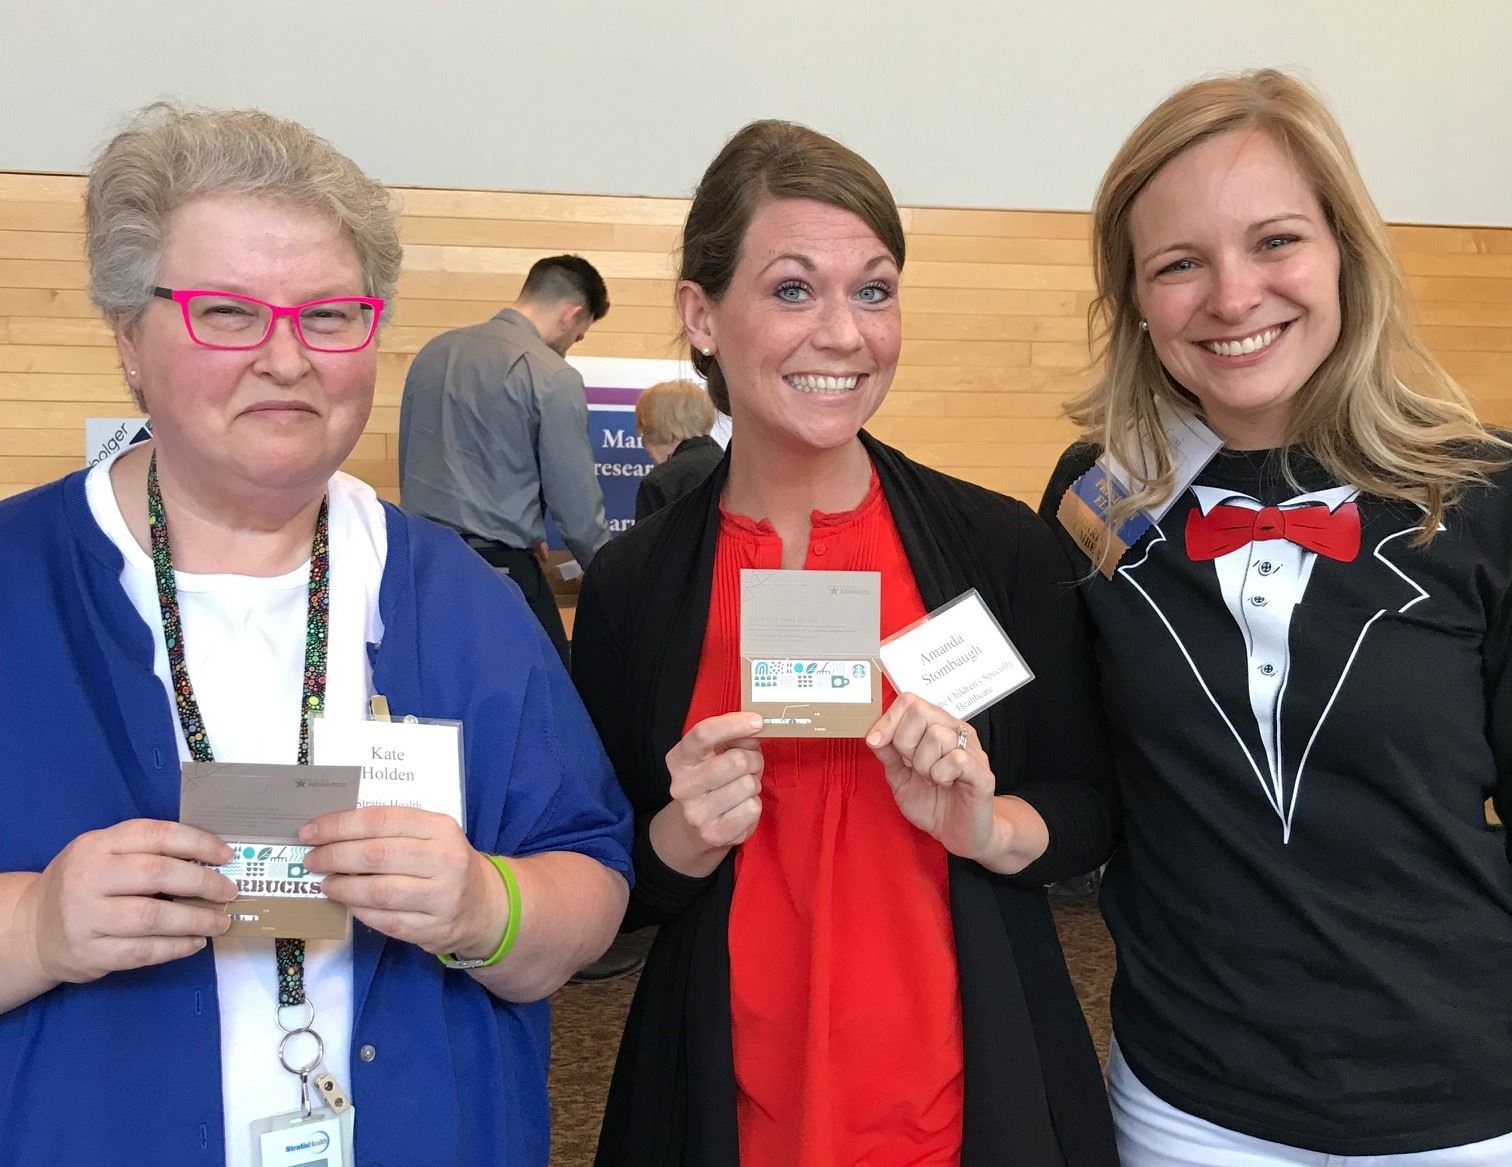 Cassi wears a tuxedo t-shirt as she interacts with two MHSCN members who are showing off some prizes.